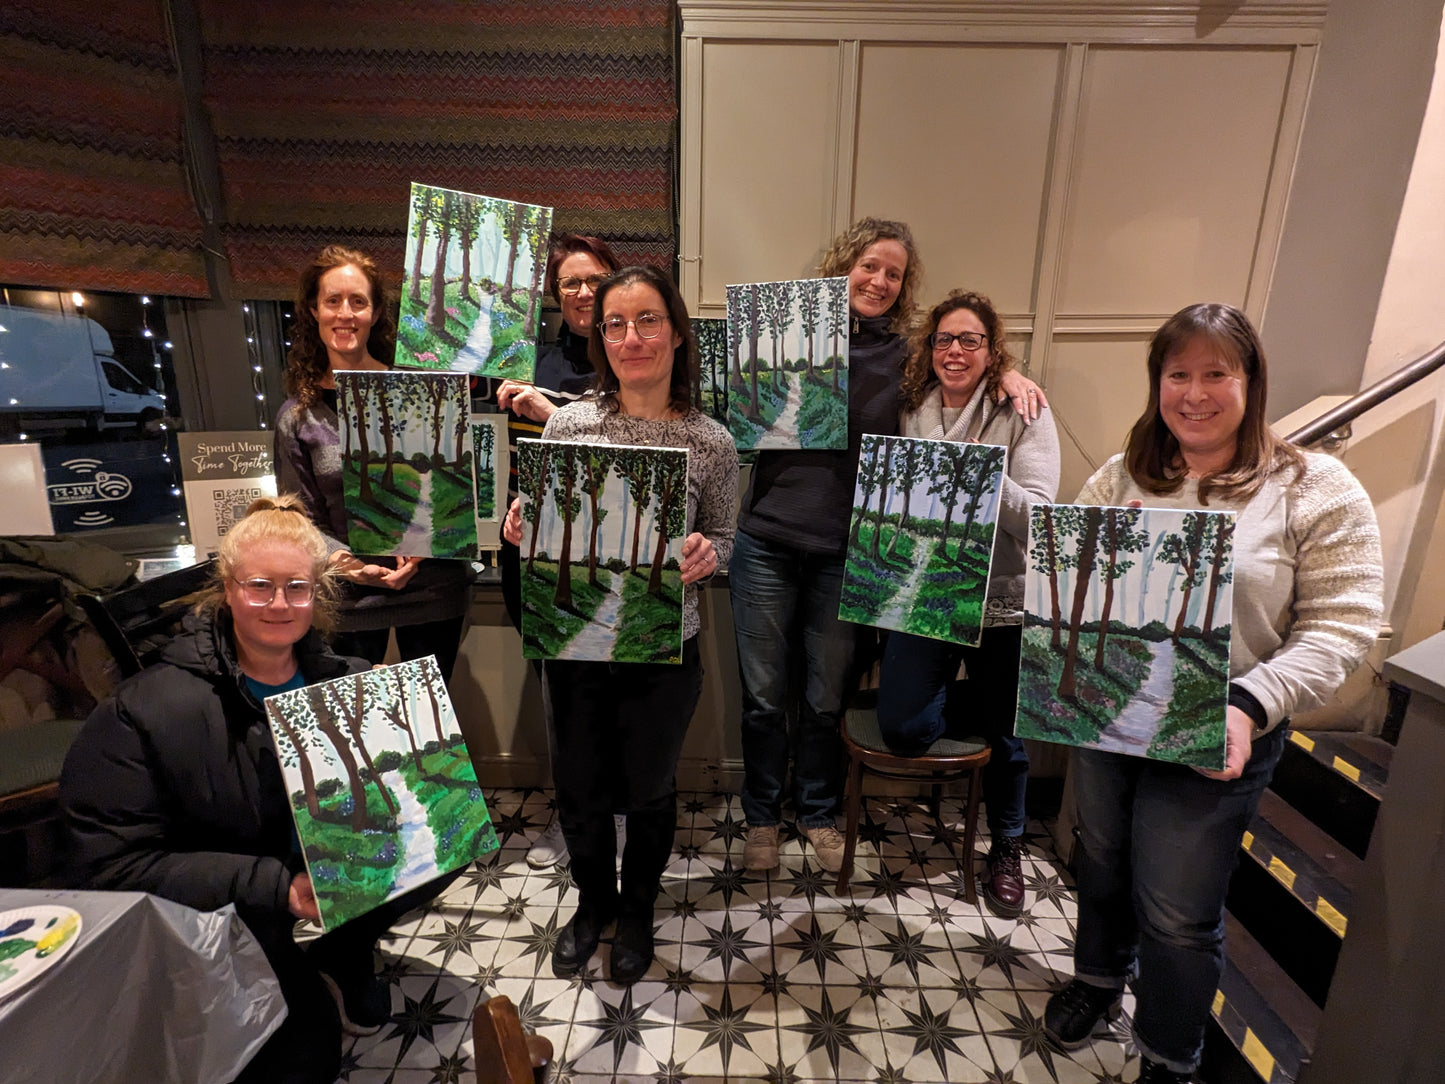 HOST YOUR OWN PAINTING WORKSHOP - Any theme